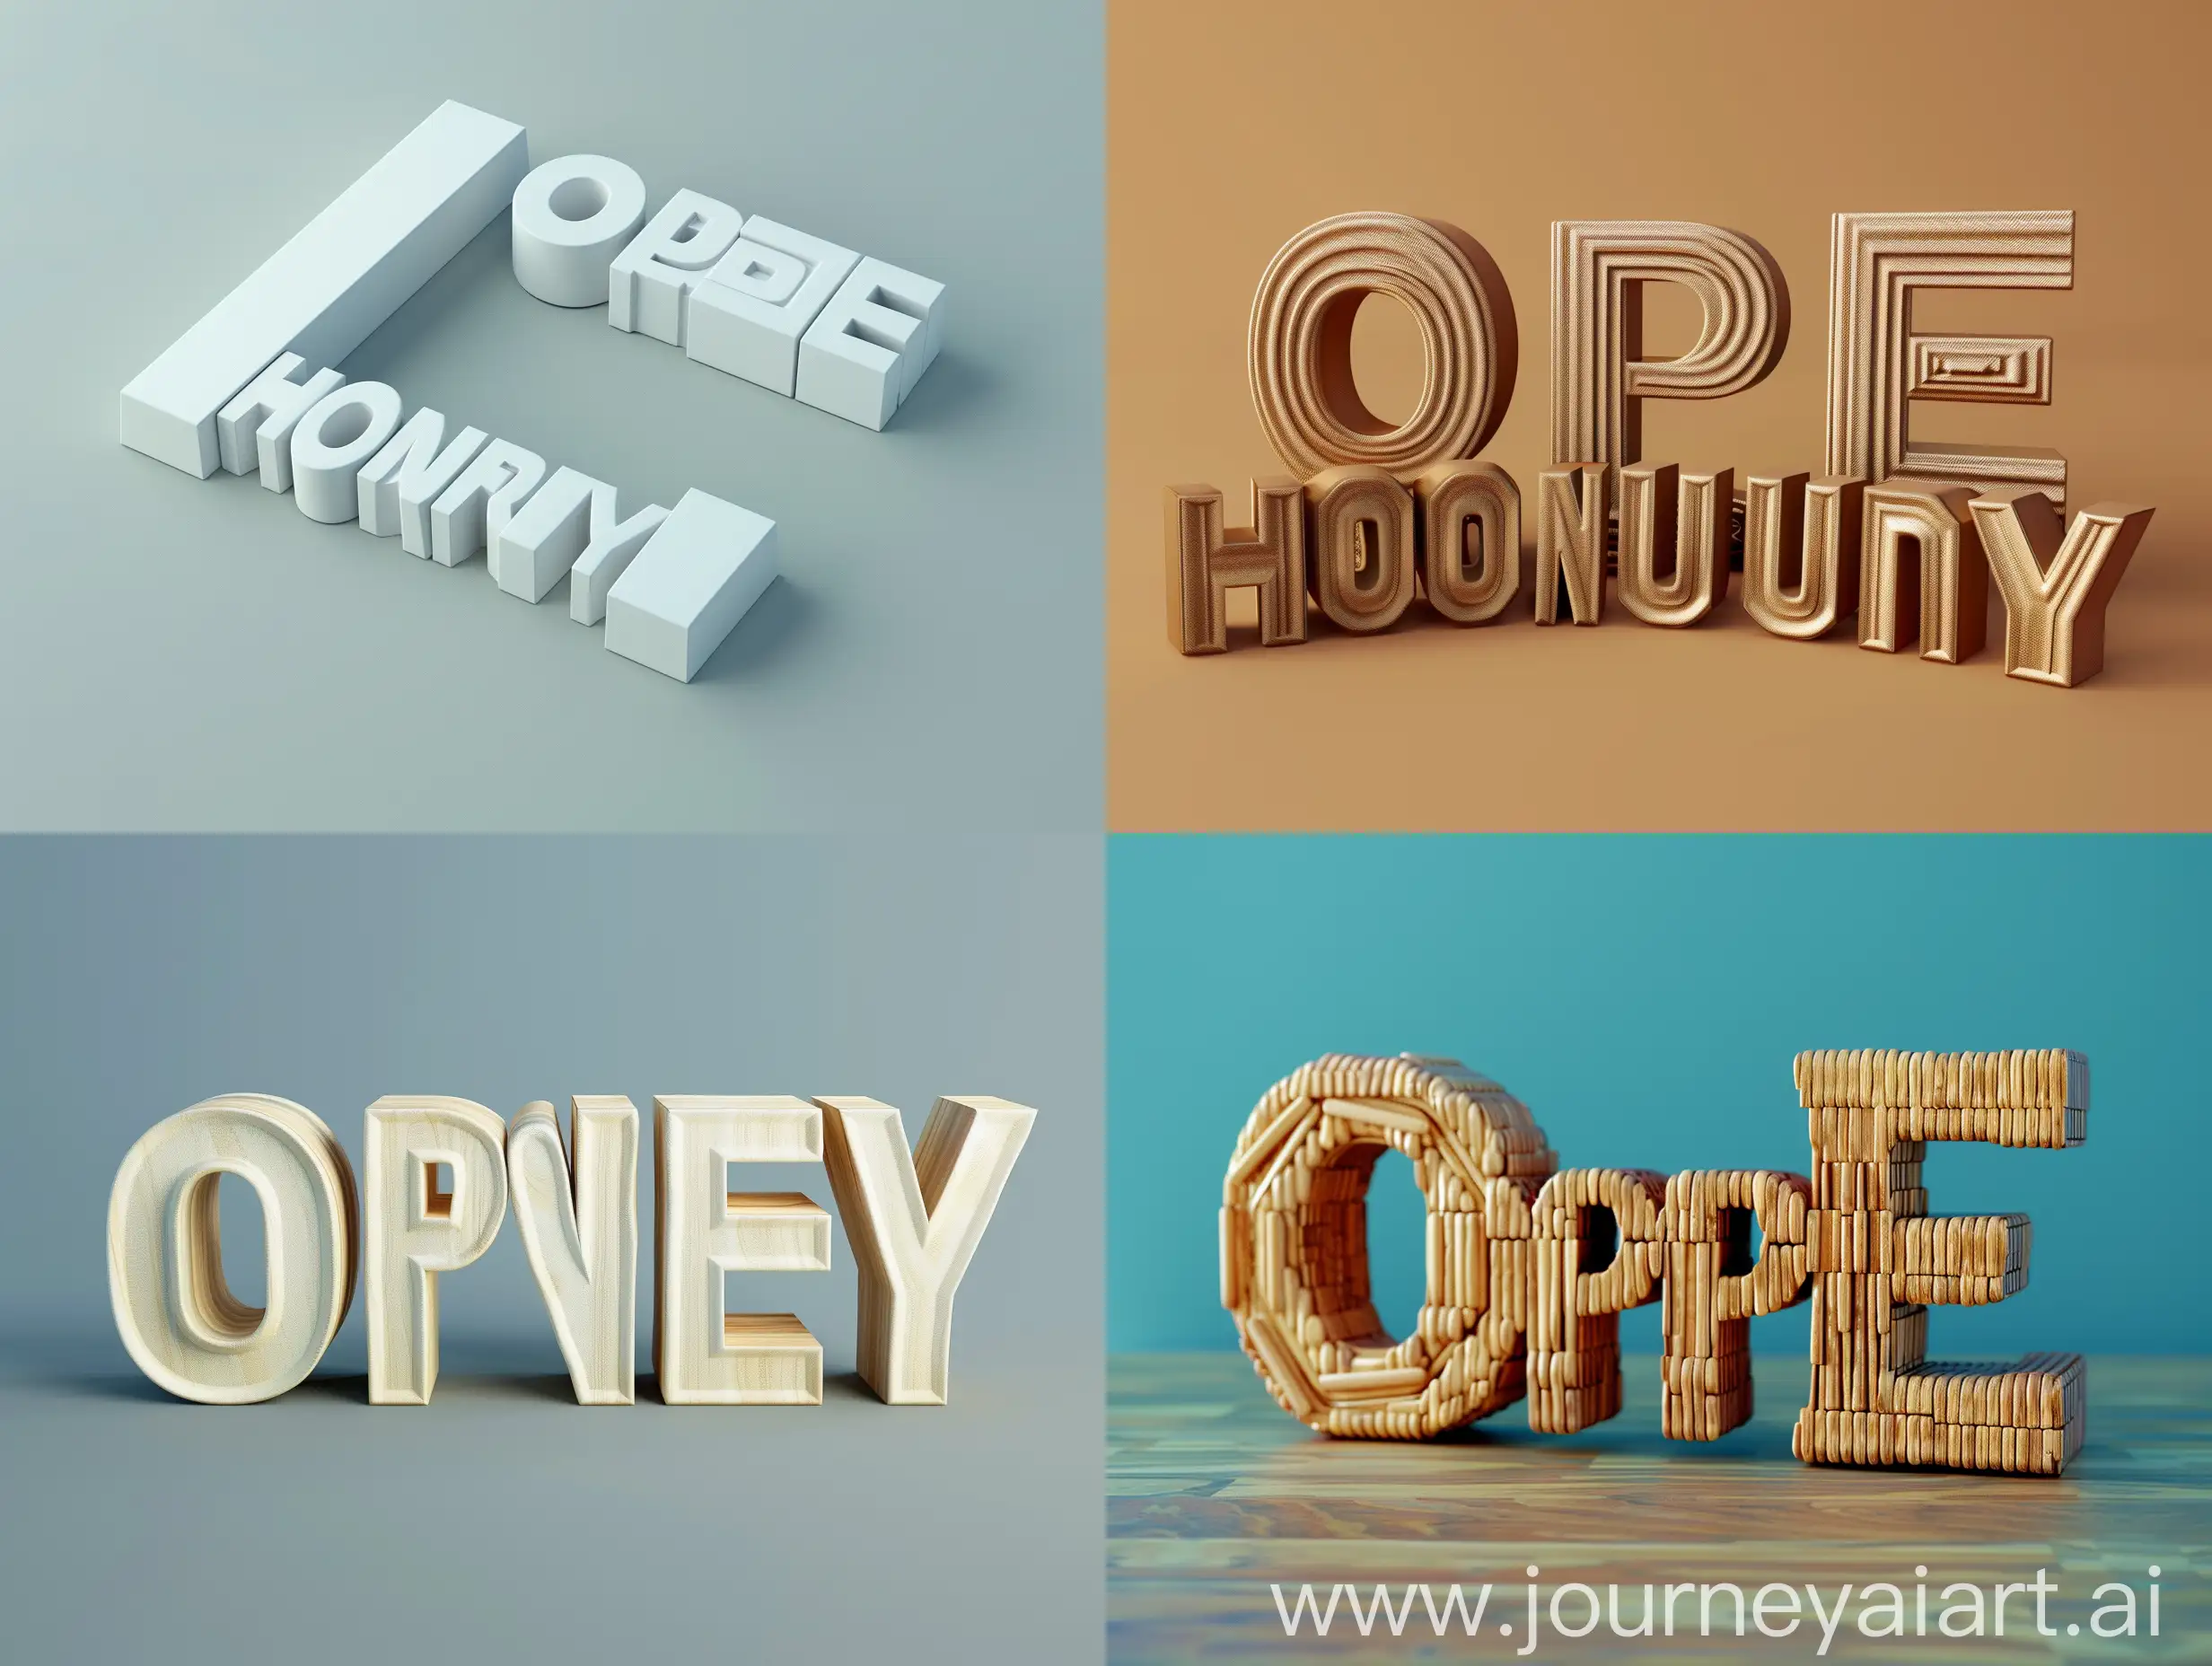 3D text model design for the word "Open Harmony"